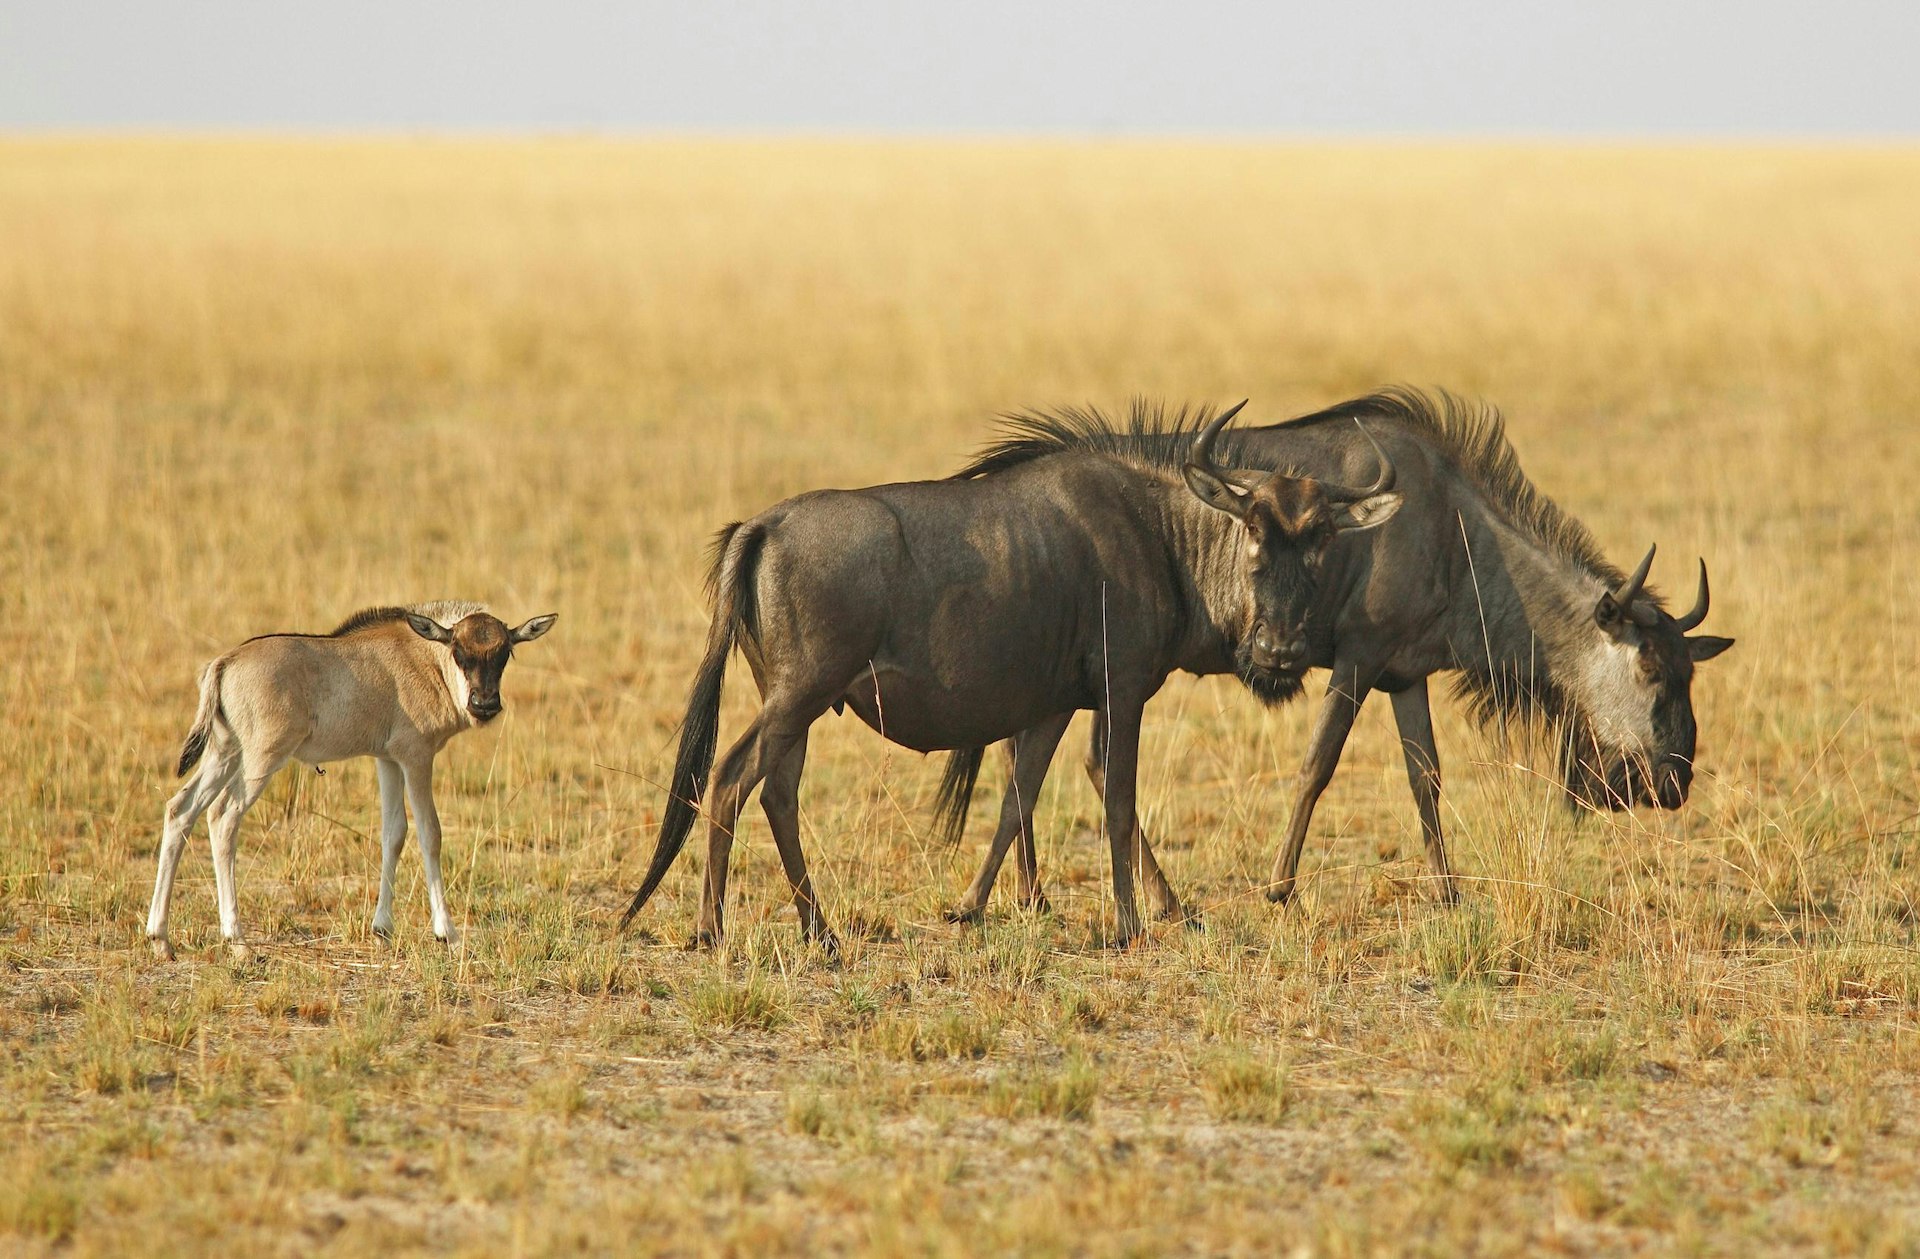 Two adult wildebeest stand in long grass and look in the direction of the camera; behind them is a newborn wildebeest standing awkwardly.